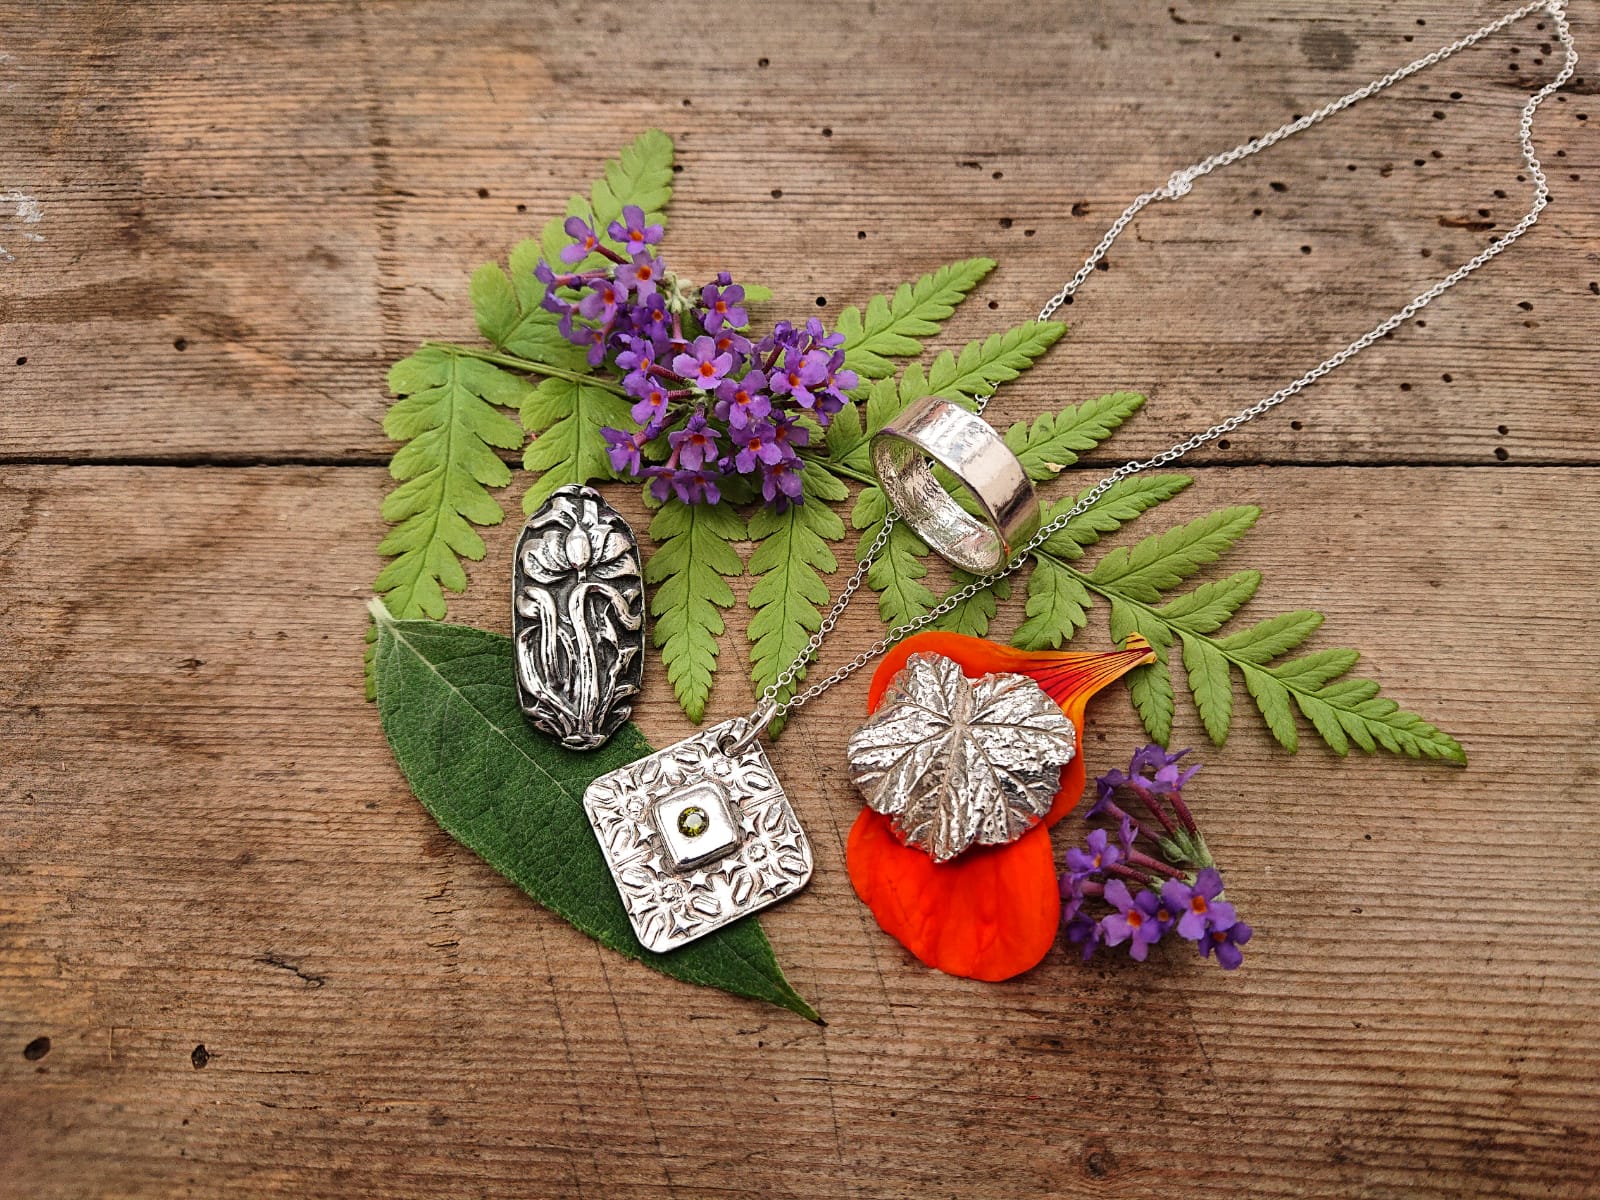 Only 1 place left: Online Silver Clay Jewellery Course